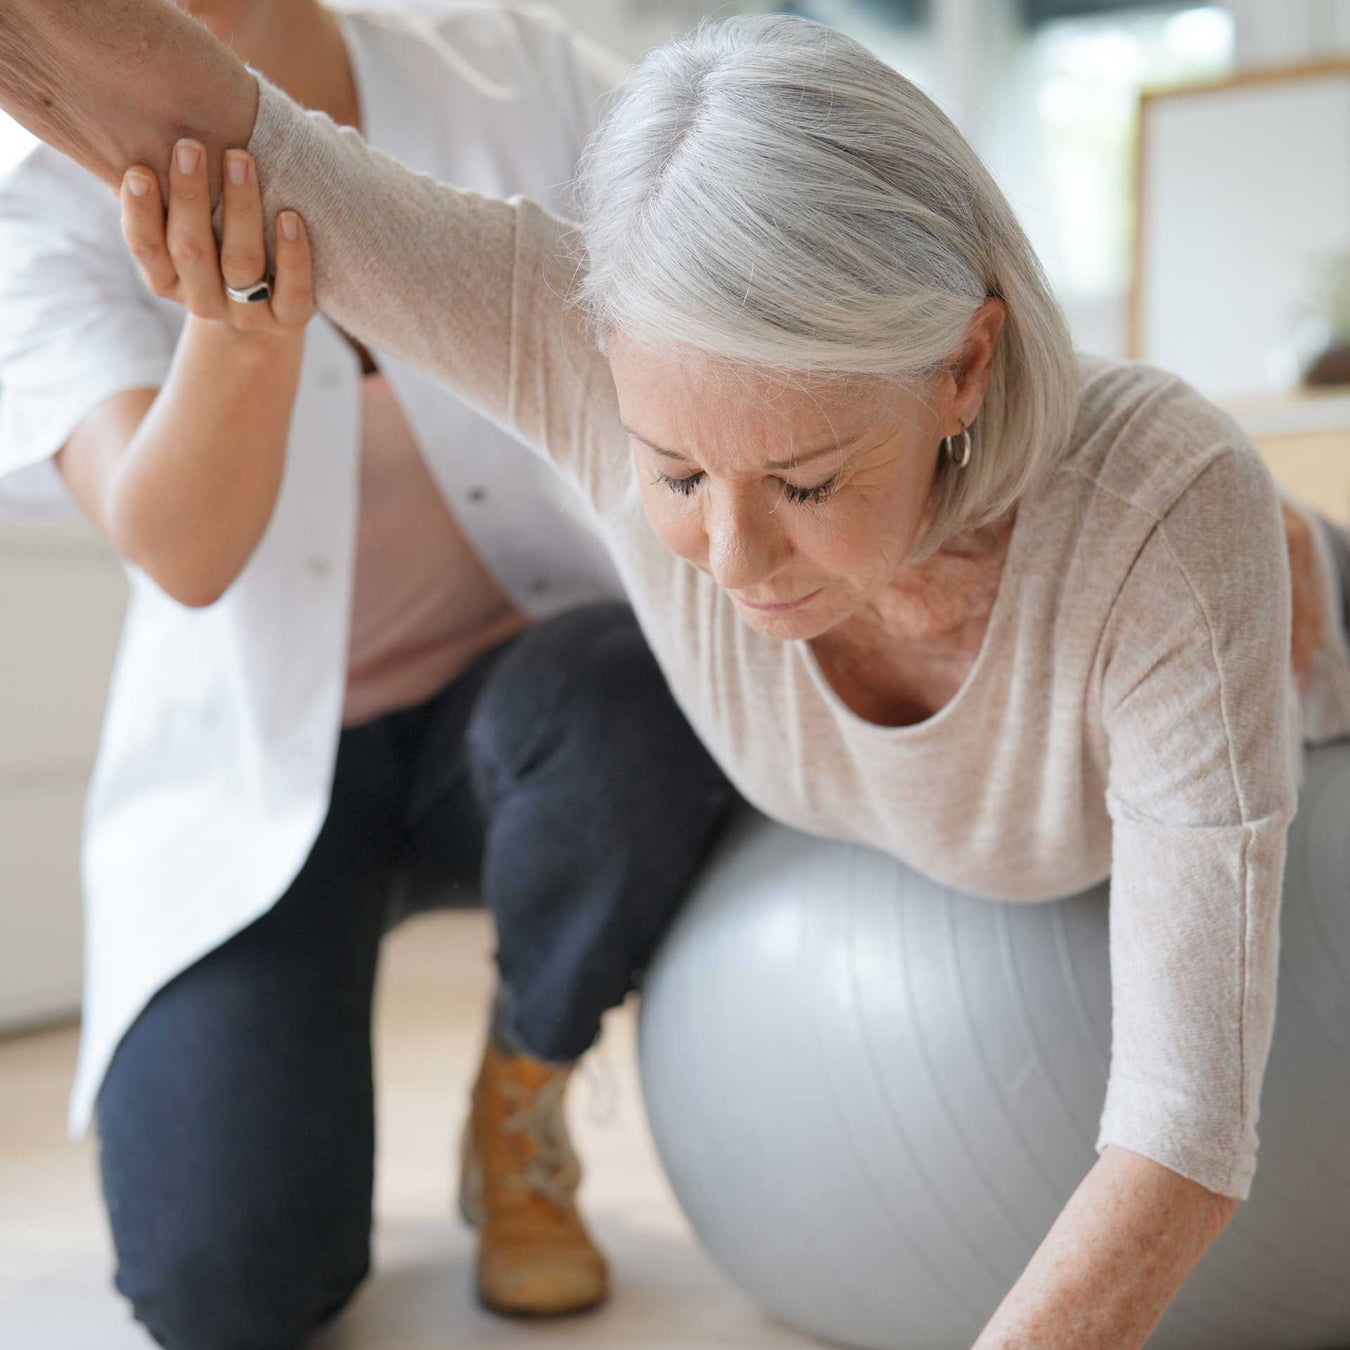 woman physical therapist assists her elderly patient with balance improving exercises